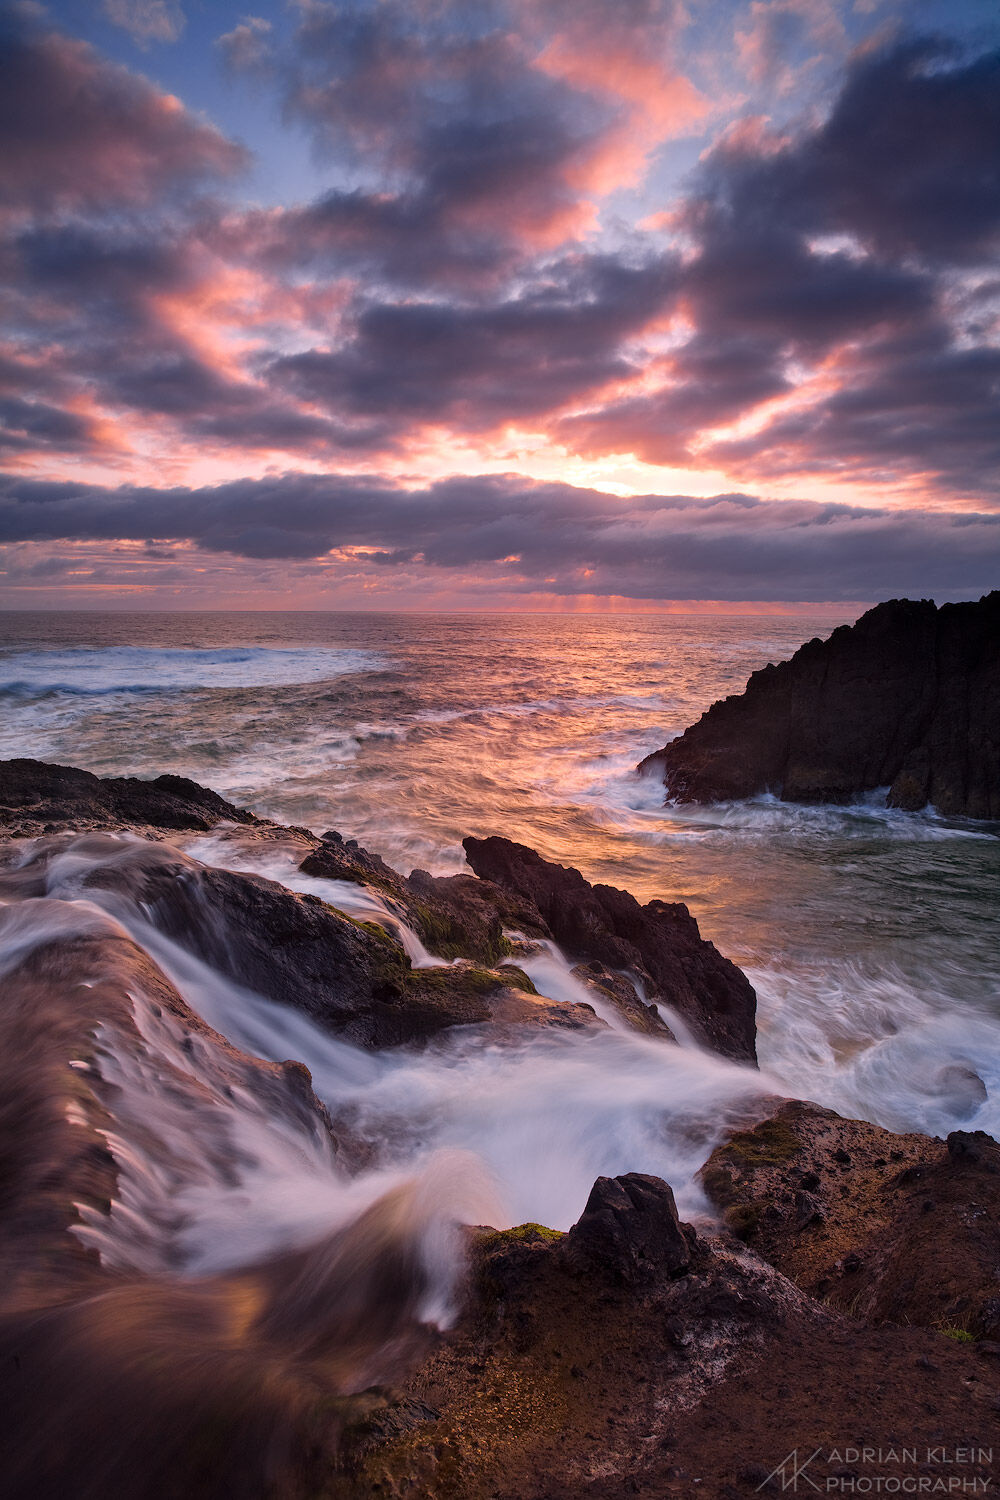 A sublime and fleeting sunset along the Northern Coast, Oregon. Limited Edition of 50.